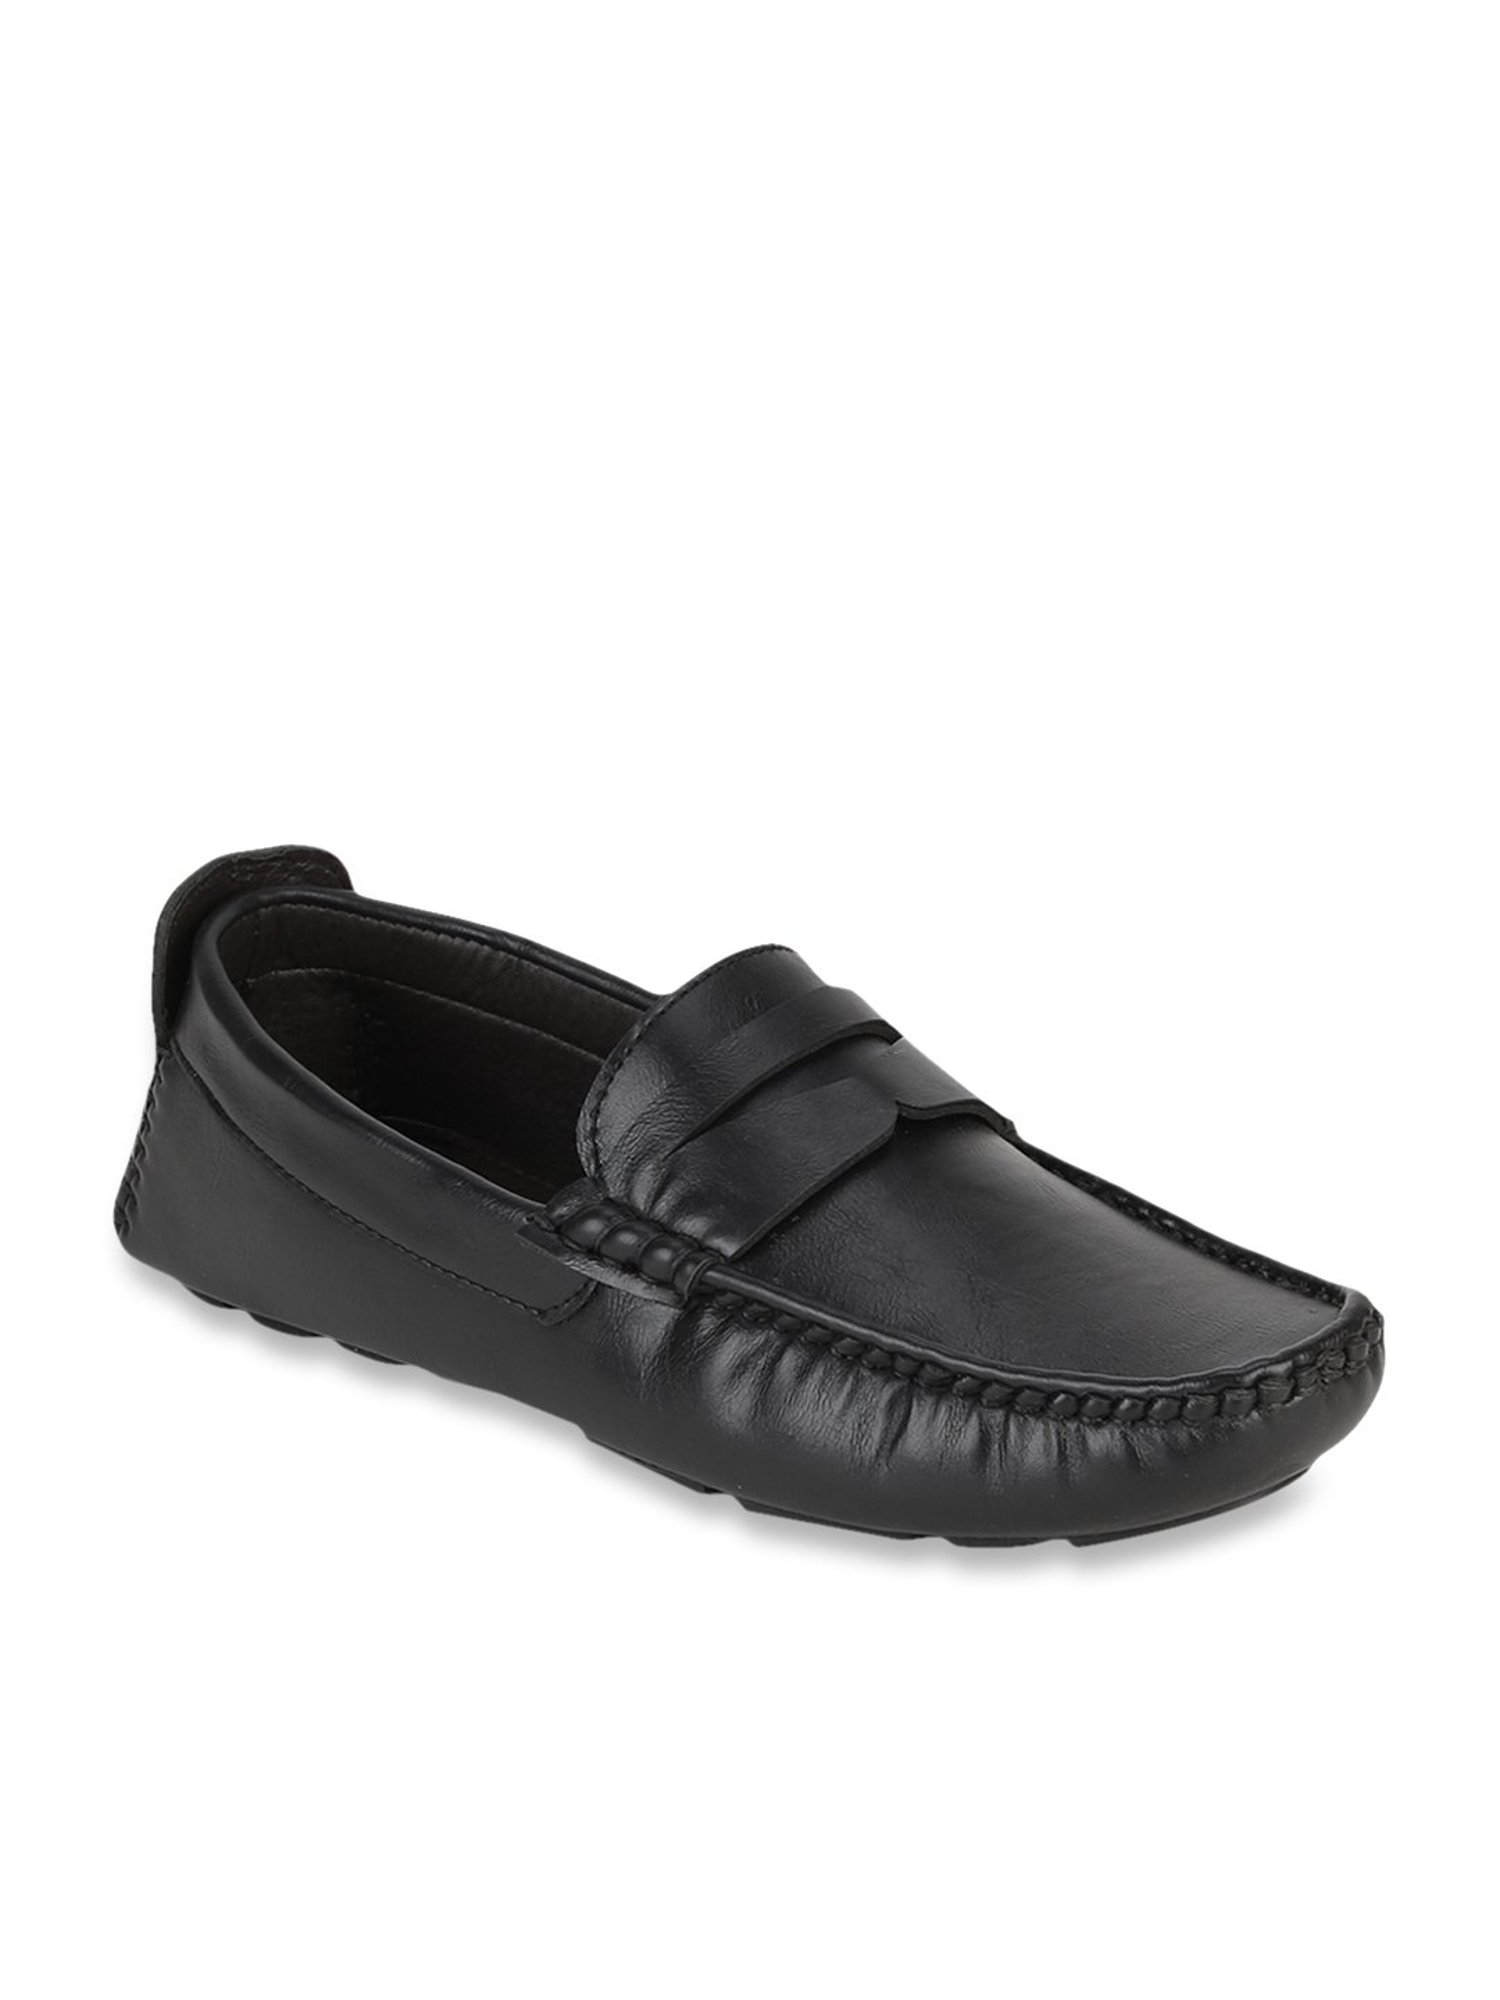 black casual loafers for men